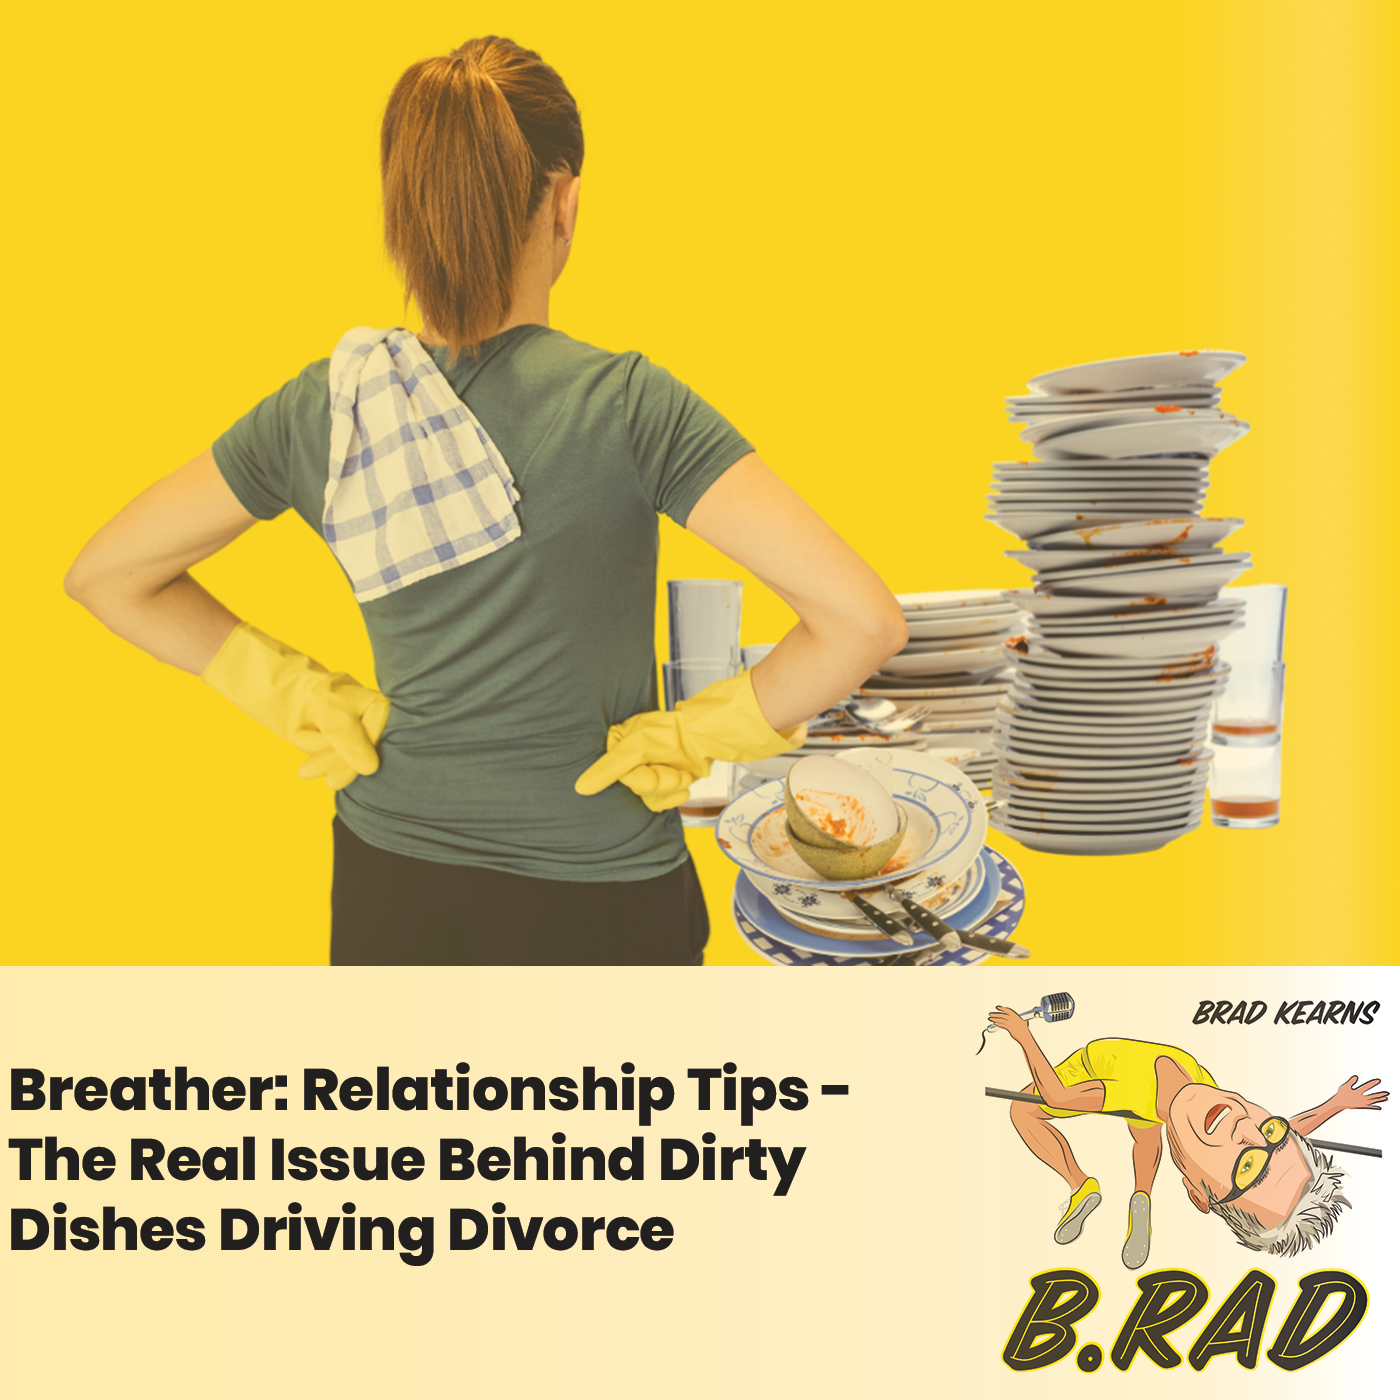 Breather: Relationship Tips - The Real Issue Behind Dirty Dishes Driving Divorce